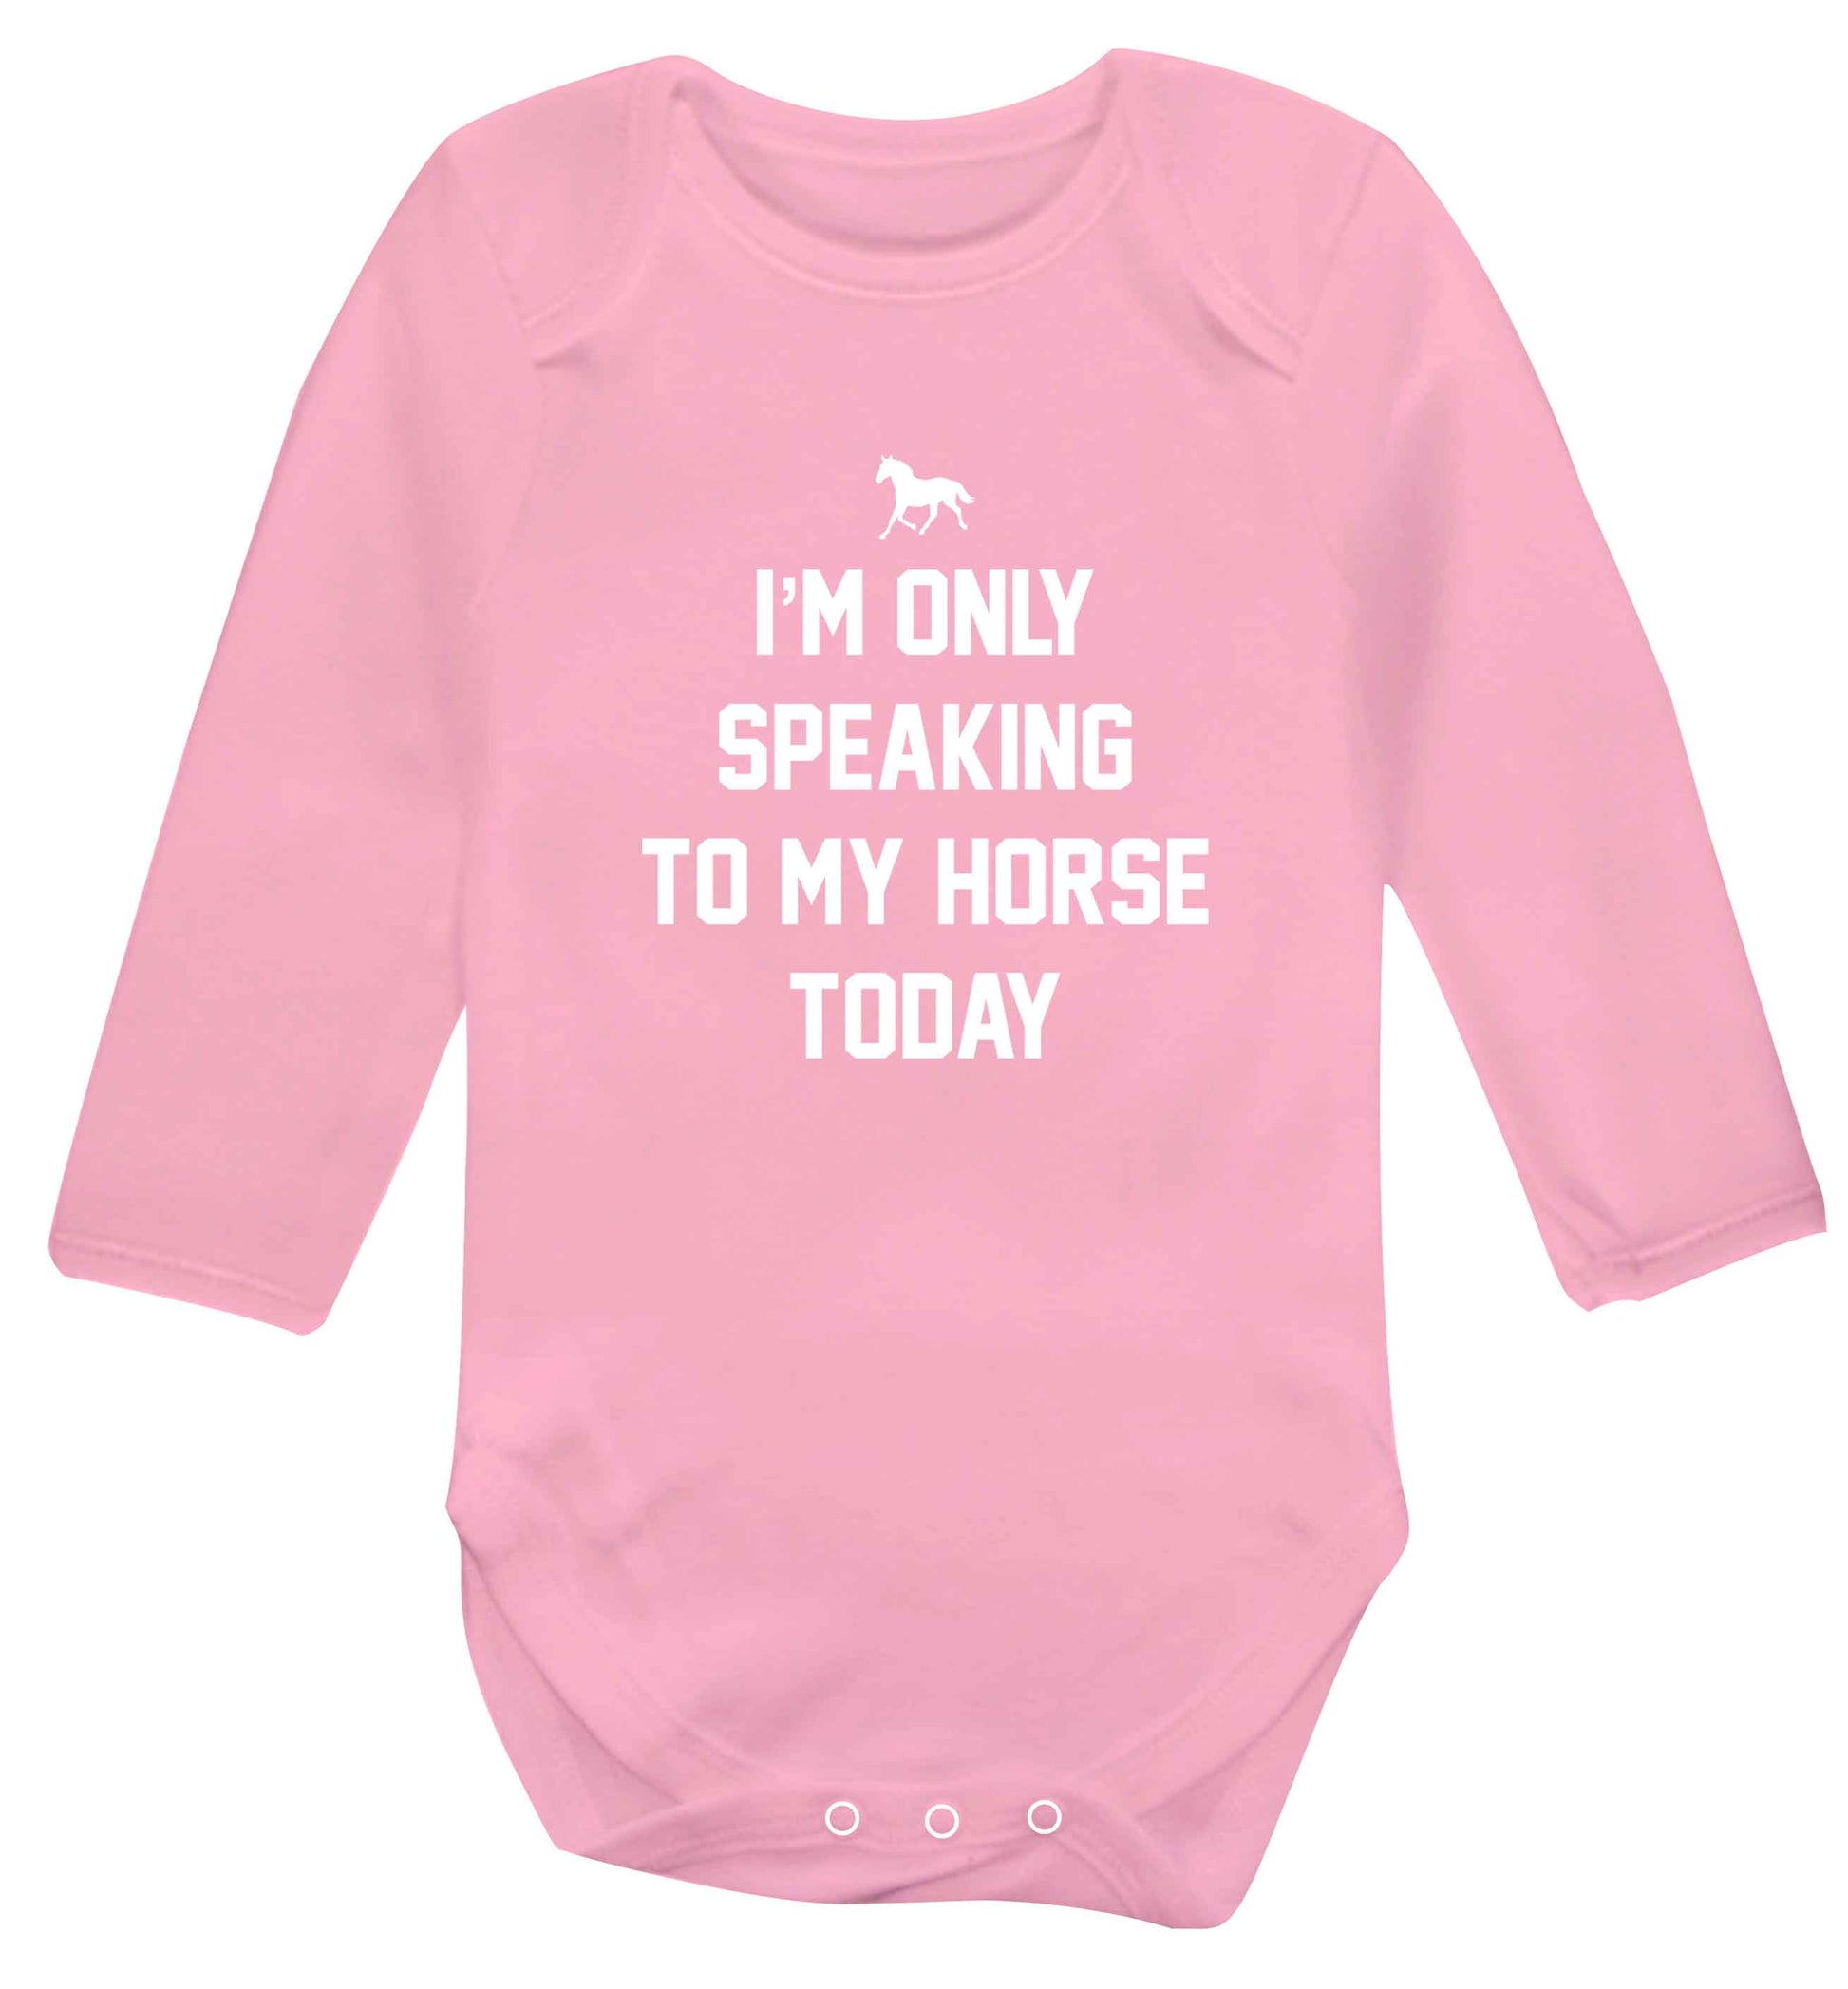 I'm only speaking to my horse today baby vest long sleeved pale pink 6-12 months